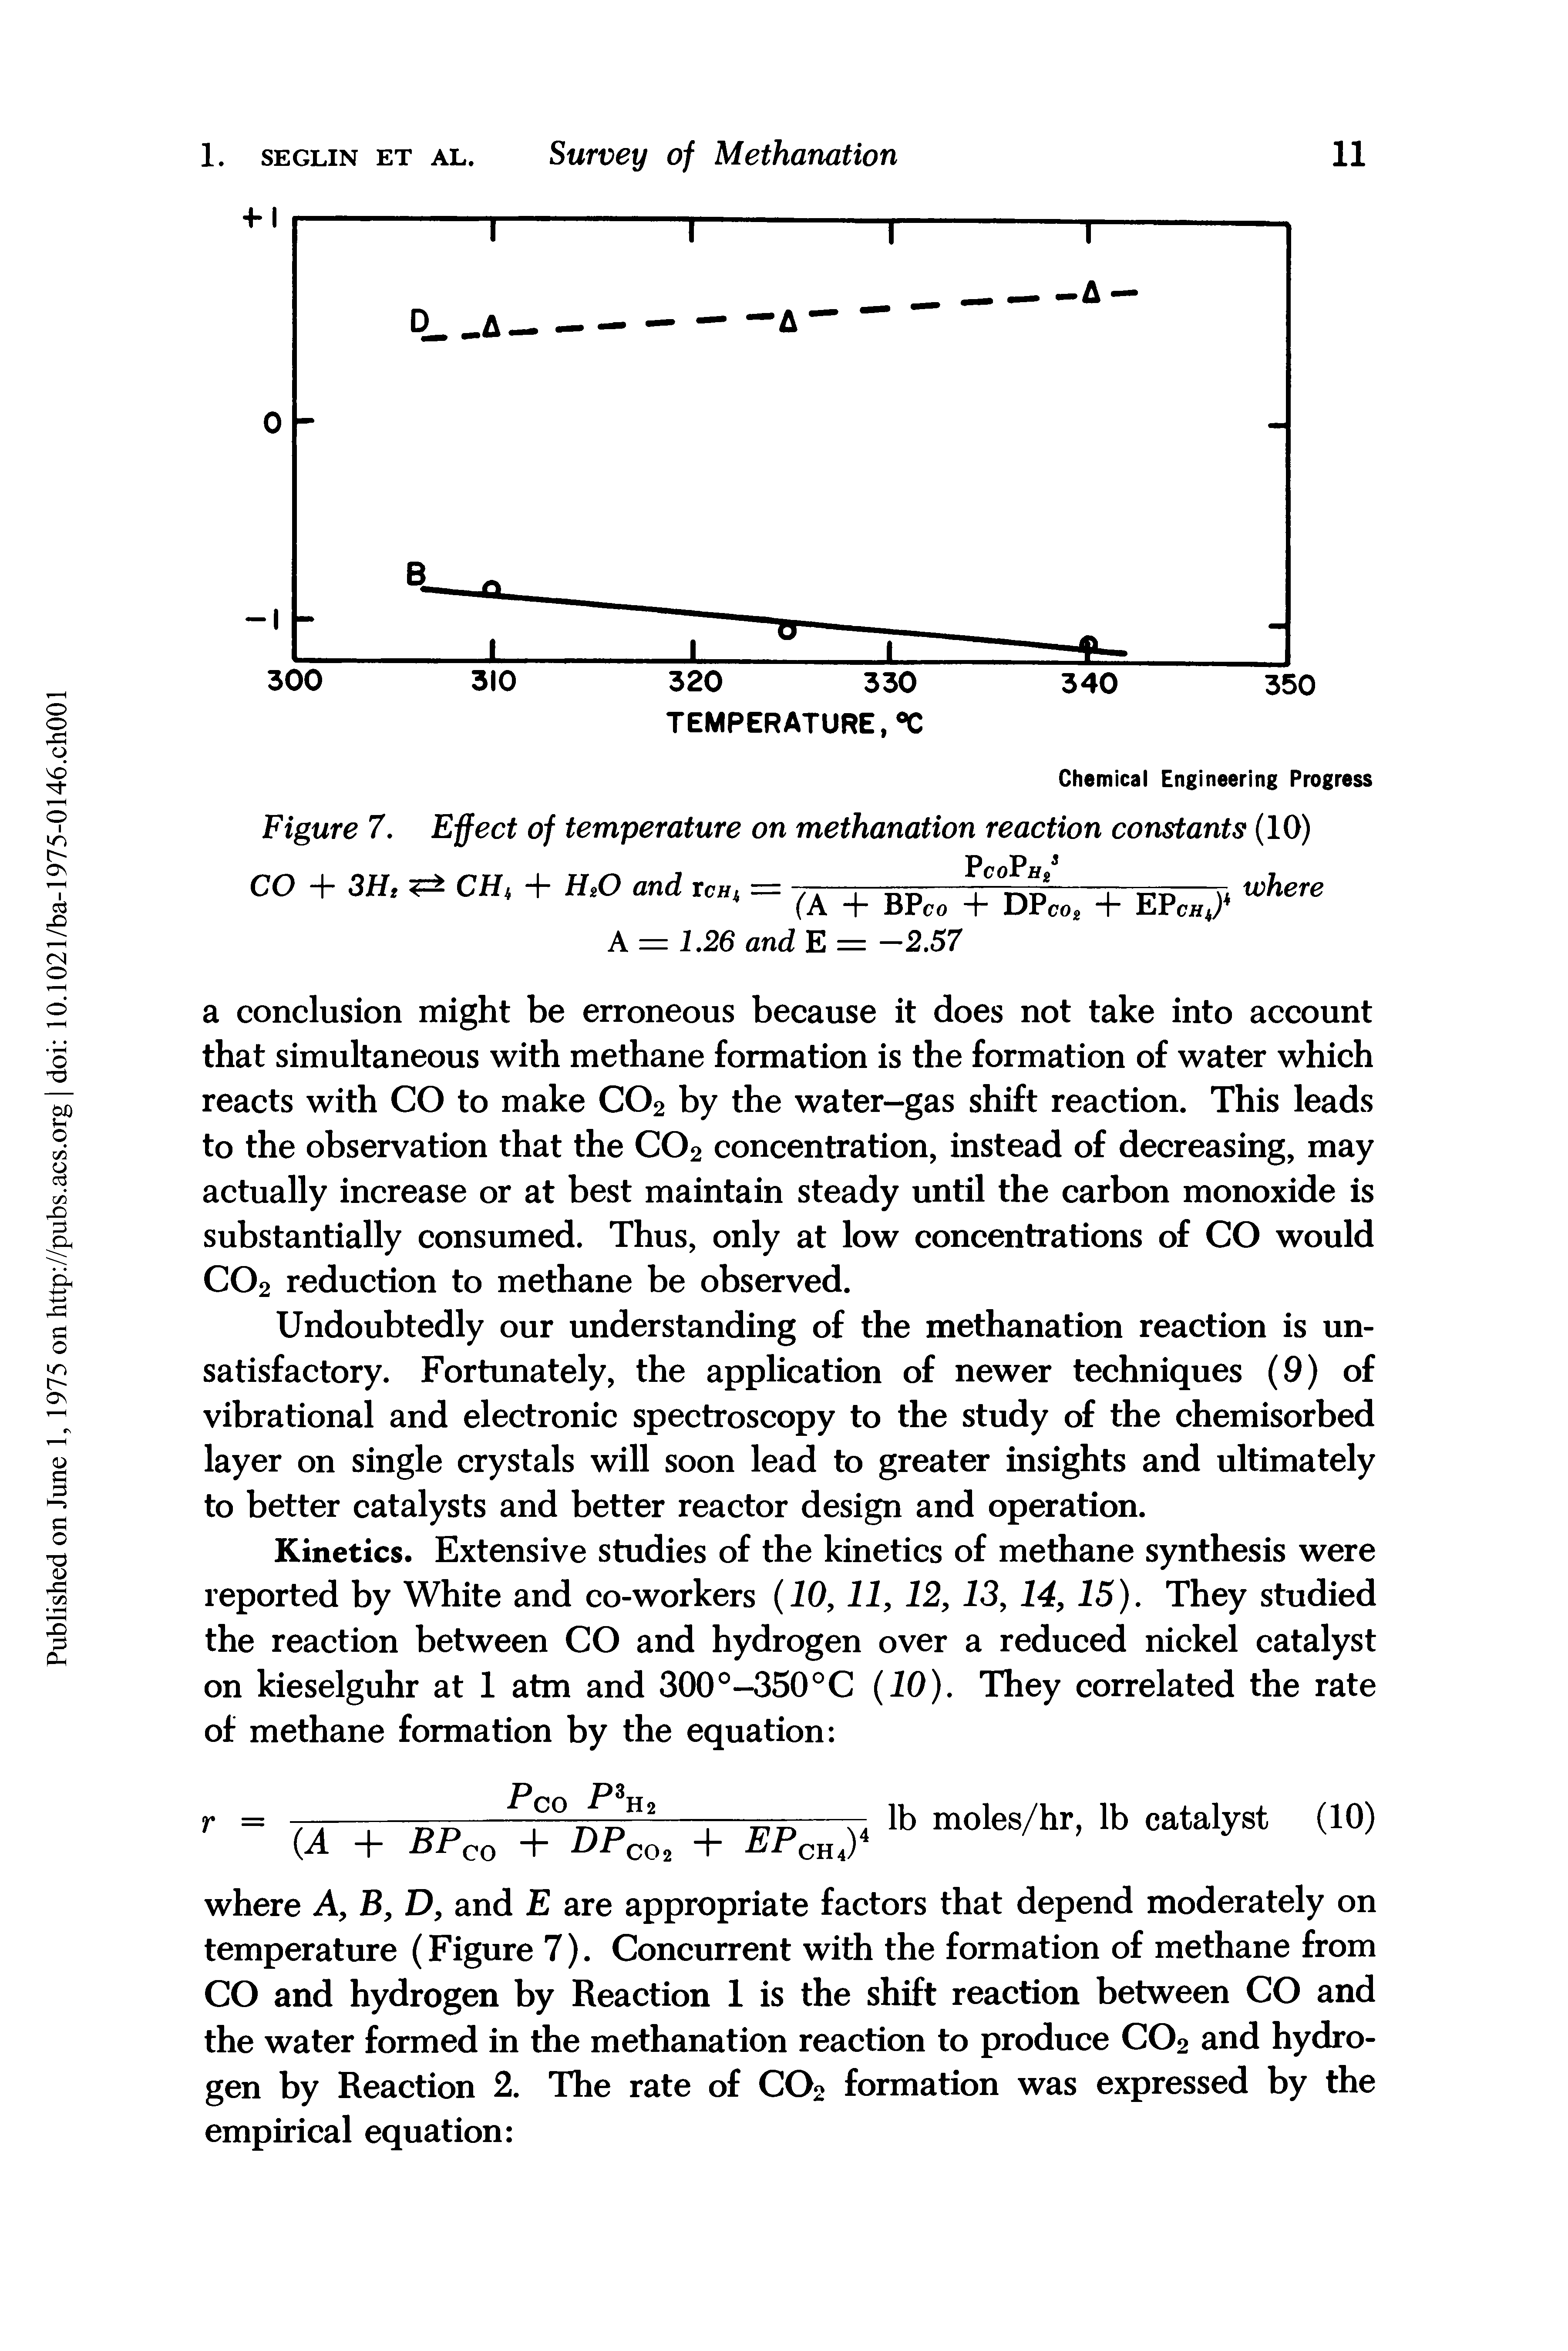 Figure 7. Effect of temperature on methanation reaction constants (10)...